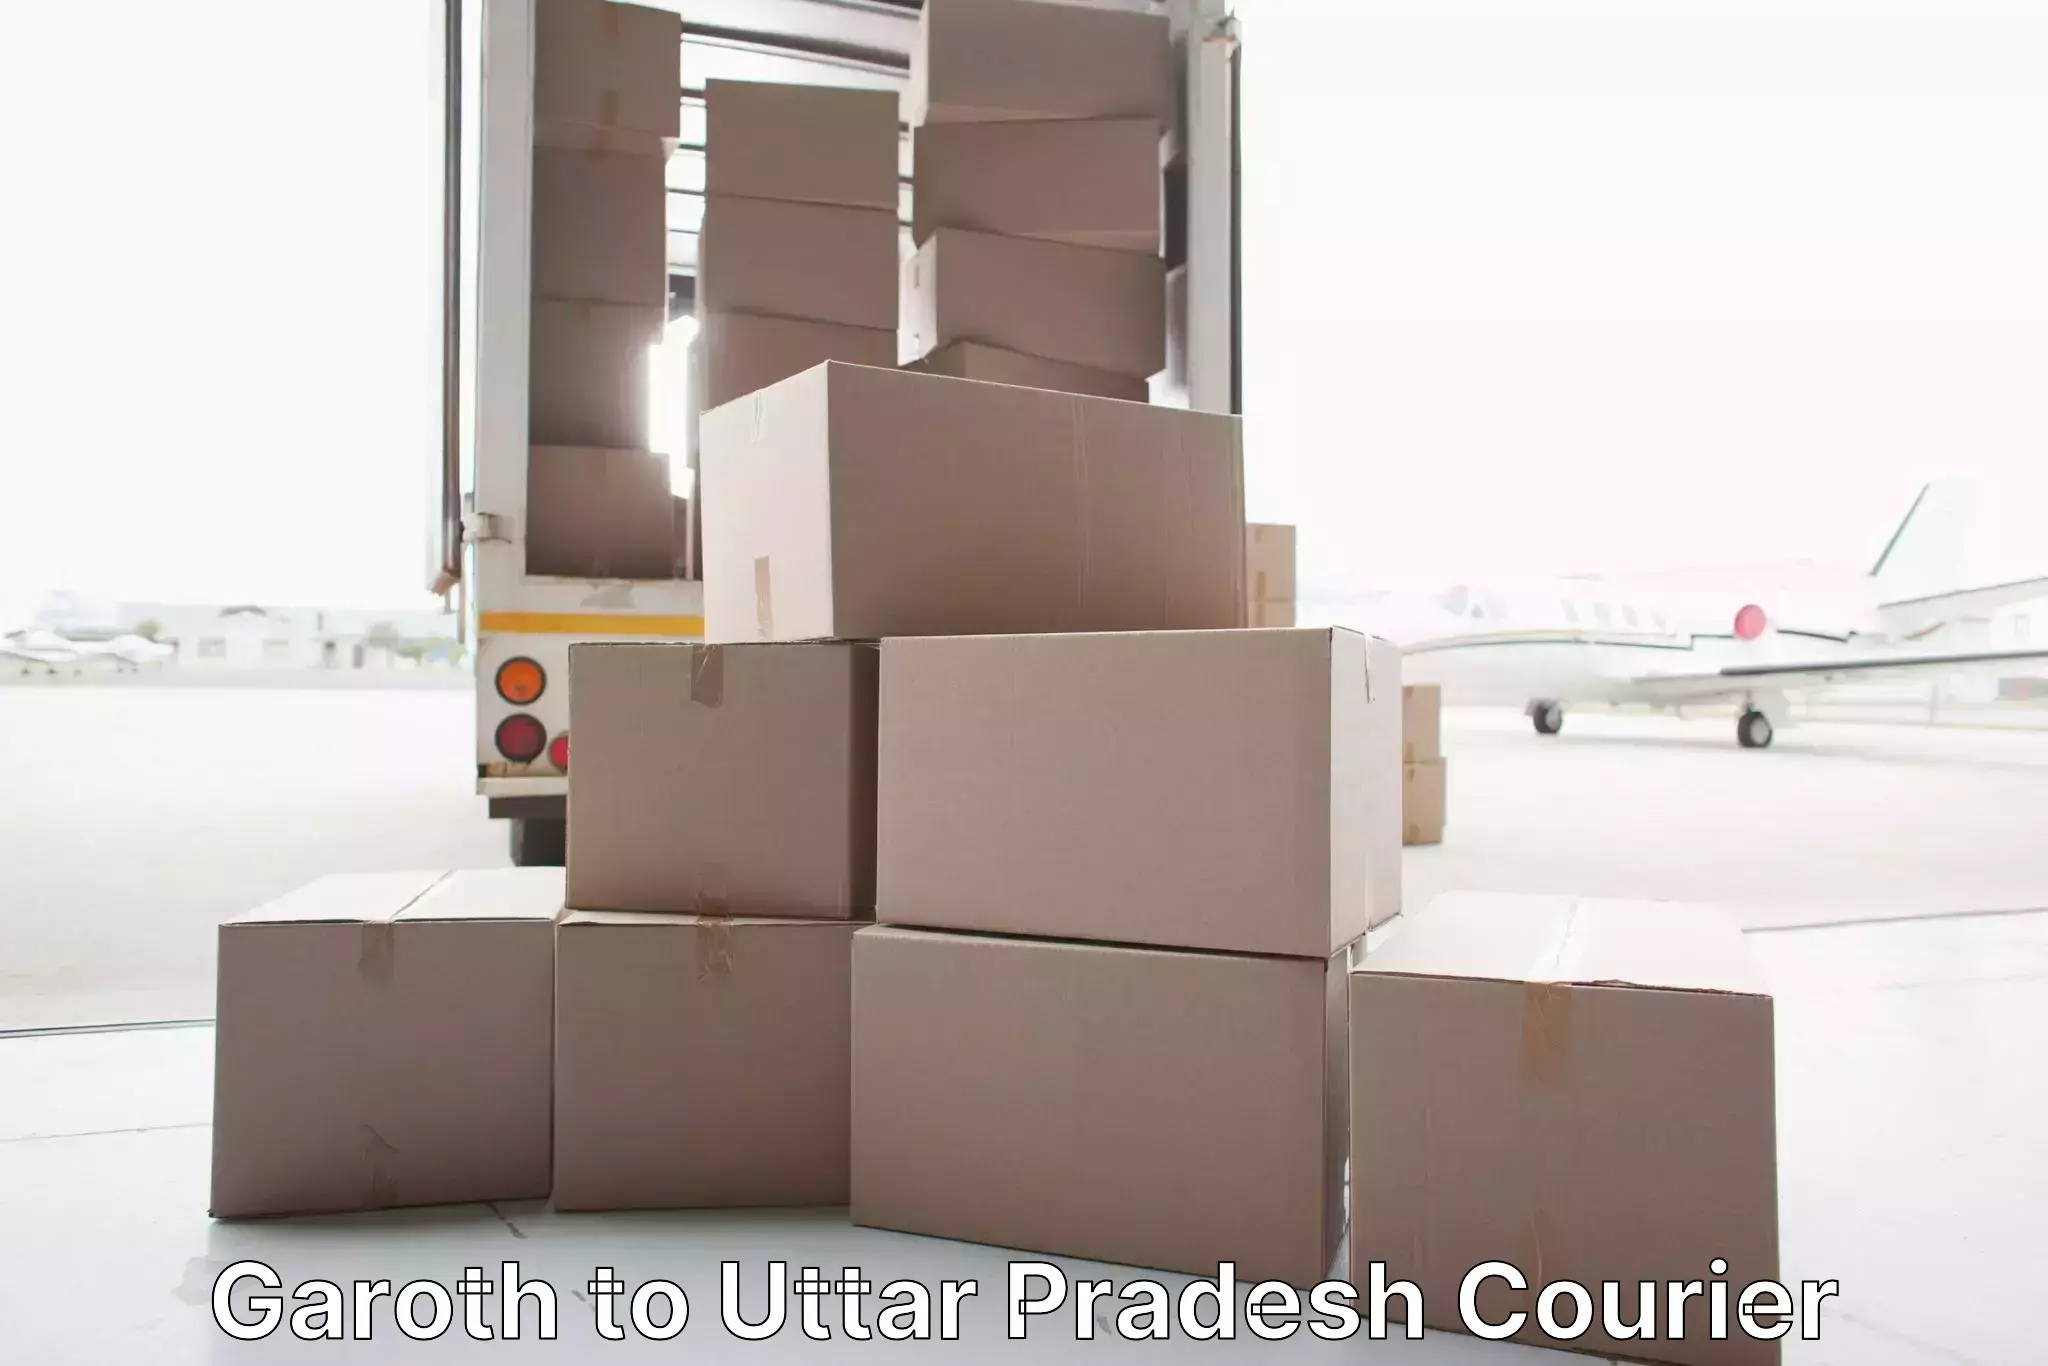 Hassle-free relocation Garoth to Harpalpur